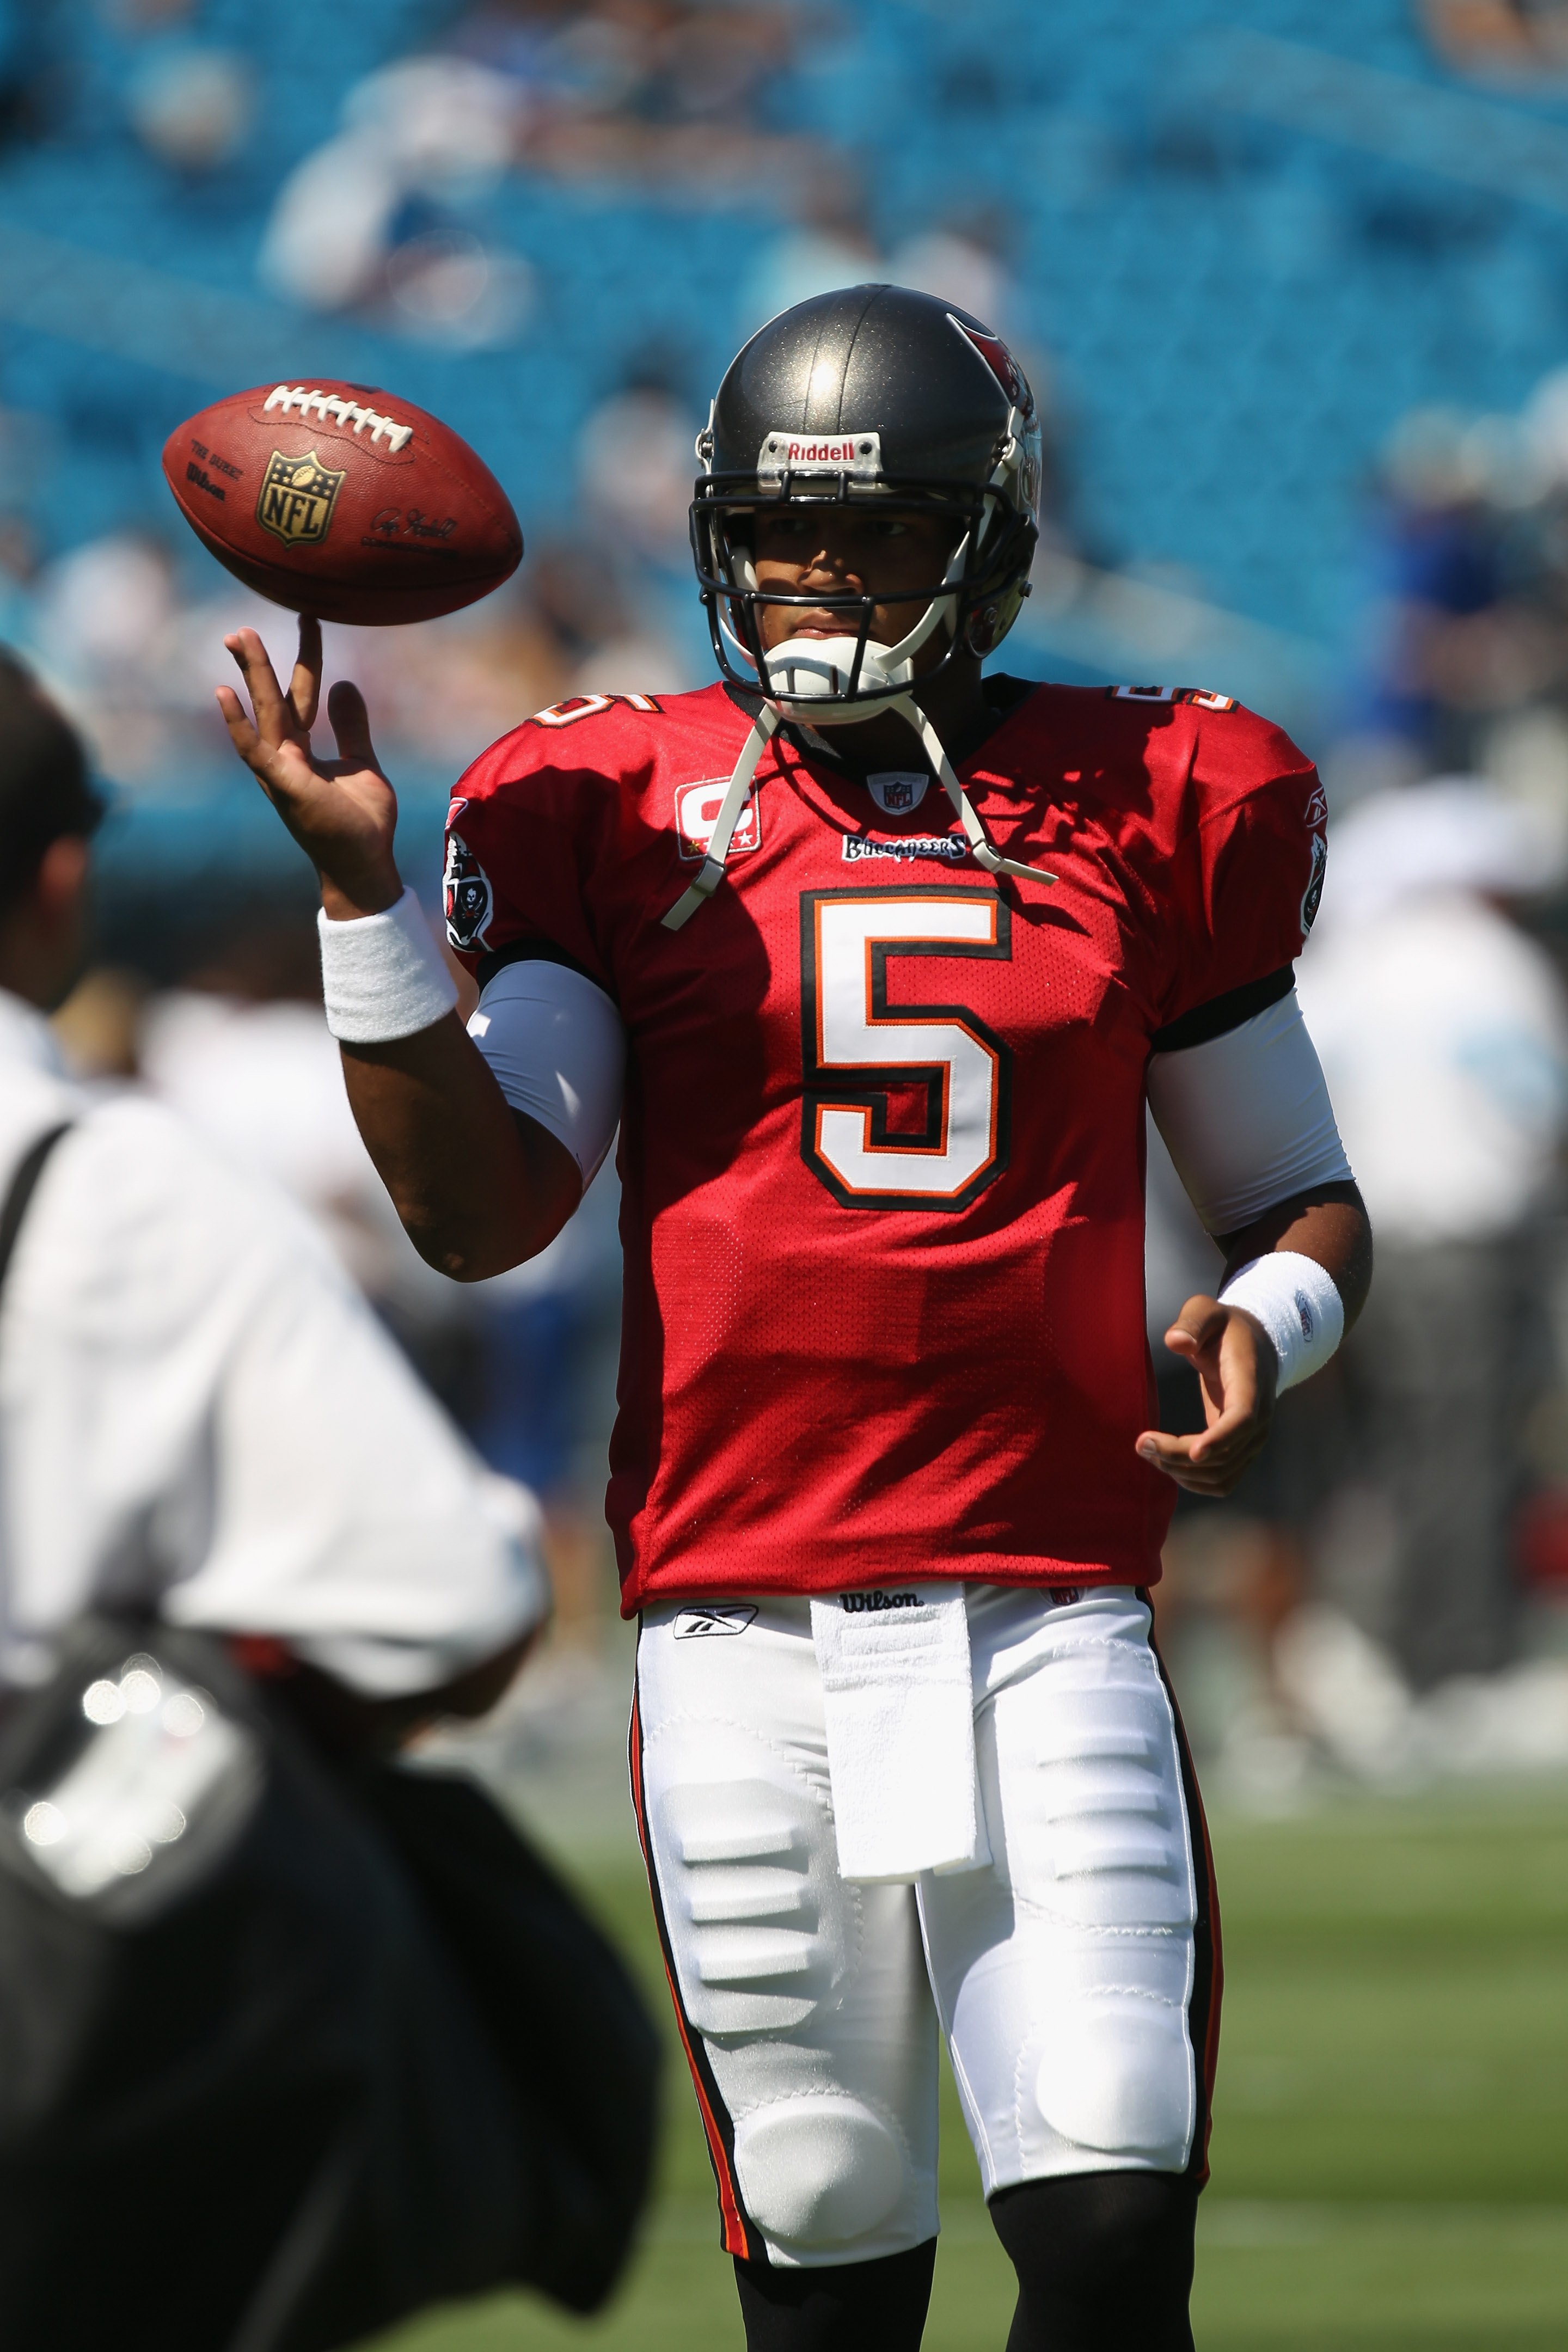 CHARLOTTE, NC - SEPTEMBER 19:  Josh Freeman #5 of the Tampa Bay Buccaneers against the Carolina Panthers during their game at Bank of America Stadium on September 19, 2010 in Charlotte, North Carolina.  (Photo by Streeter Lecka/Getty Images)